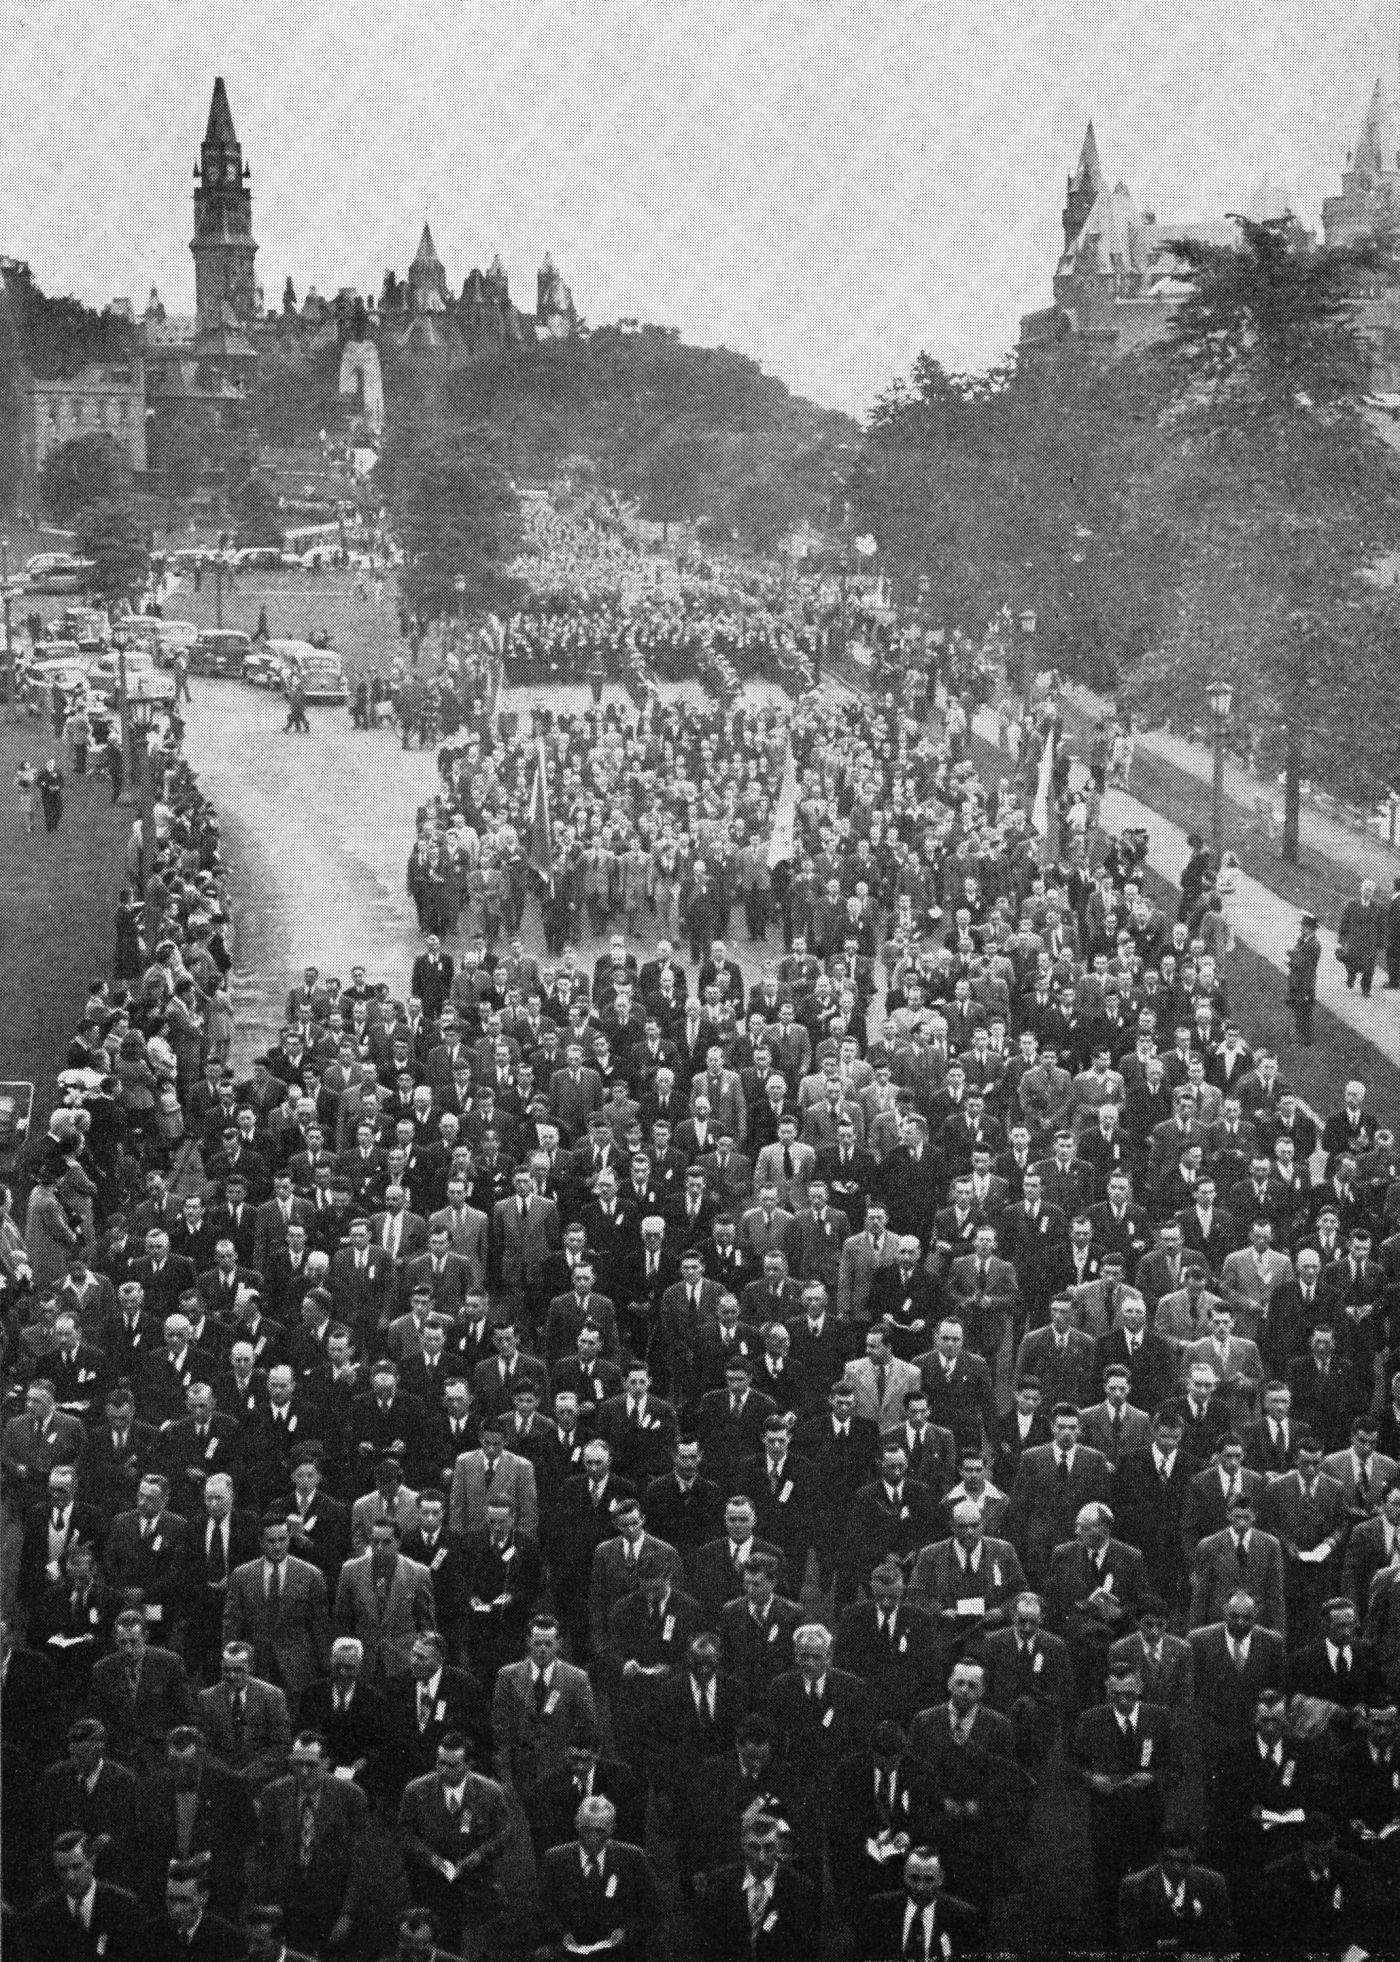 Black and white photograph of a grand procession. Men in suits and ties are walking down a roadway, some holding booklets, others holding flags. Spectators are massed along the route. In the distance  behind them, buildings of Parliament.